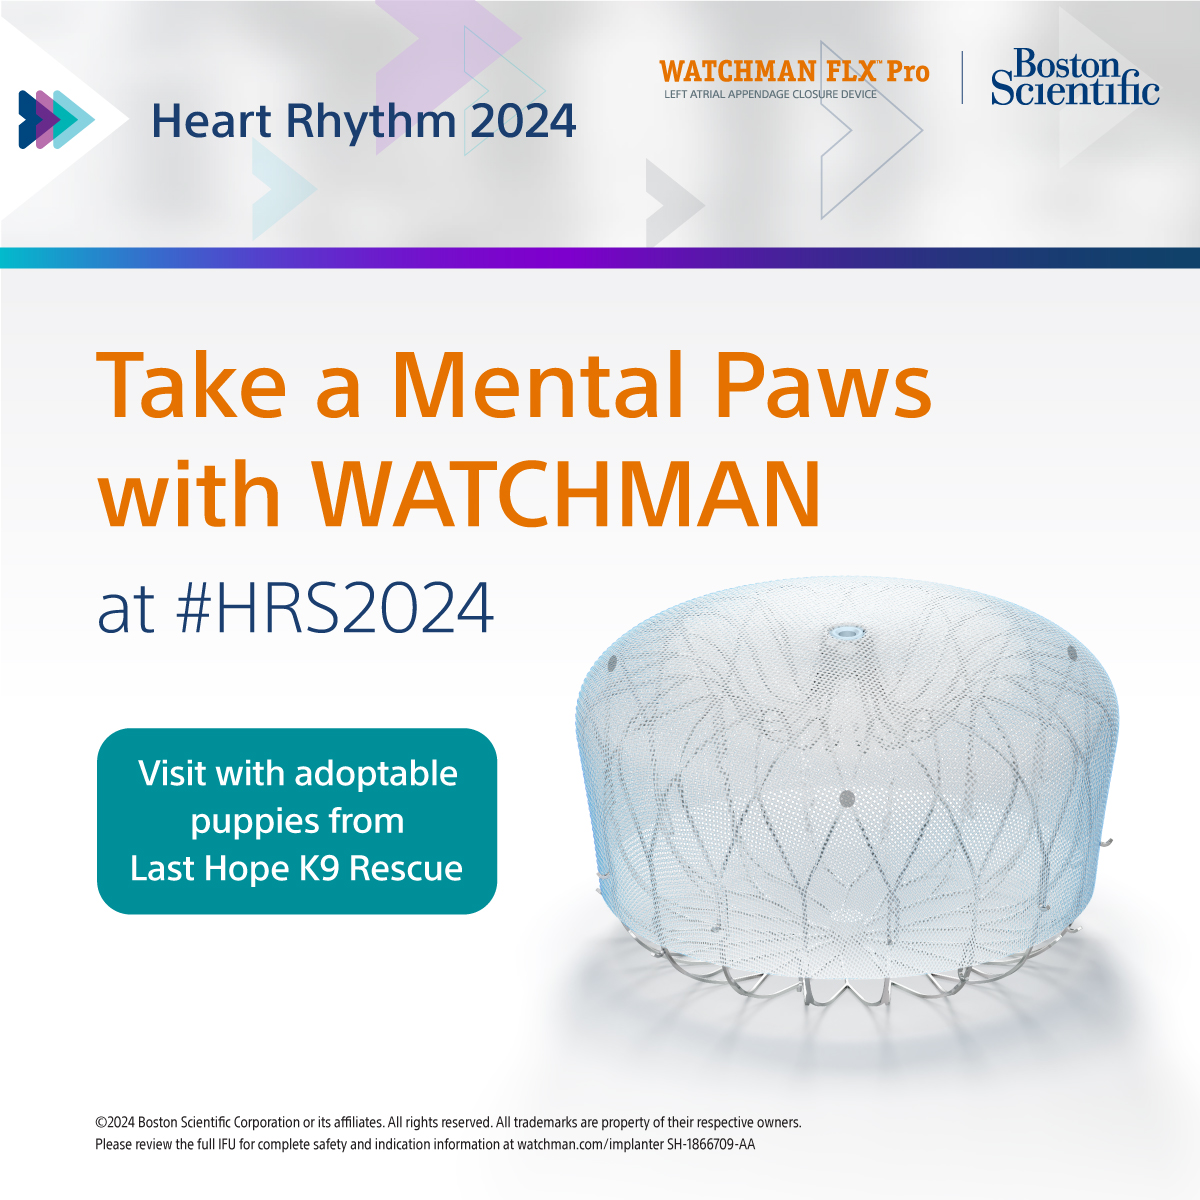 Enjoy a Mental Paws & meet our adoptable friends from @lasthopek9. Don’t forget to upload your selfies & tag @BSCCardiology #HRS2024